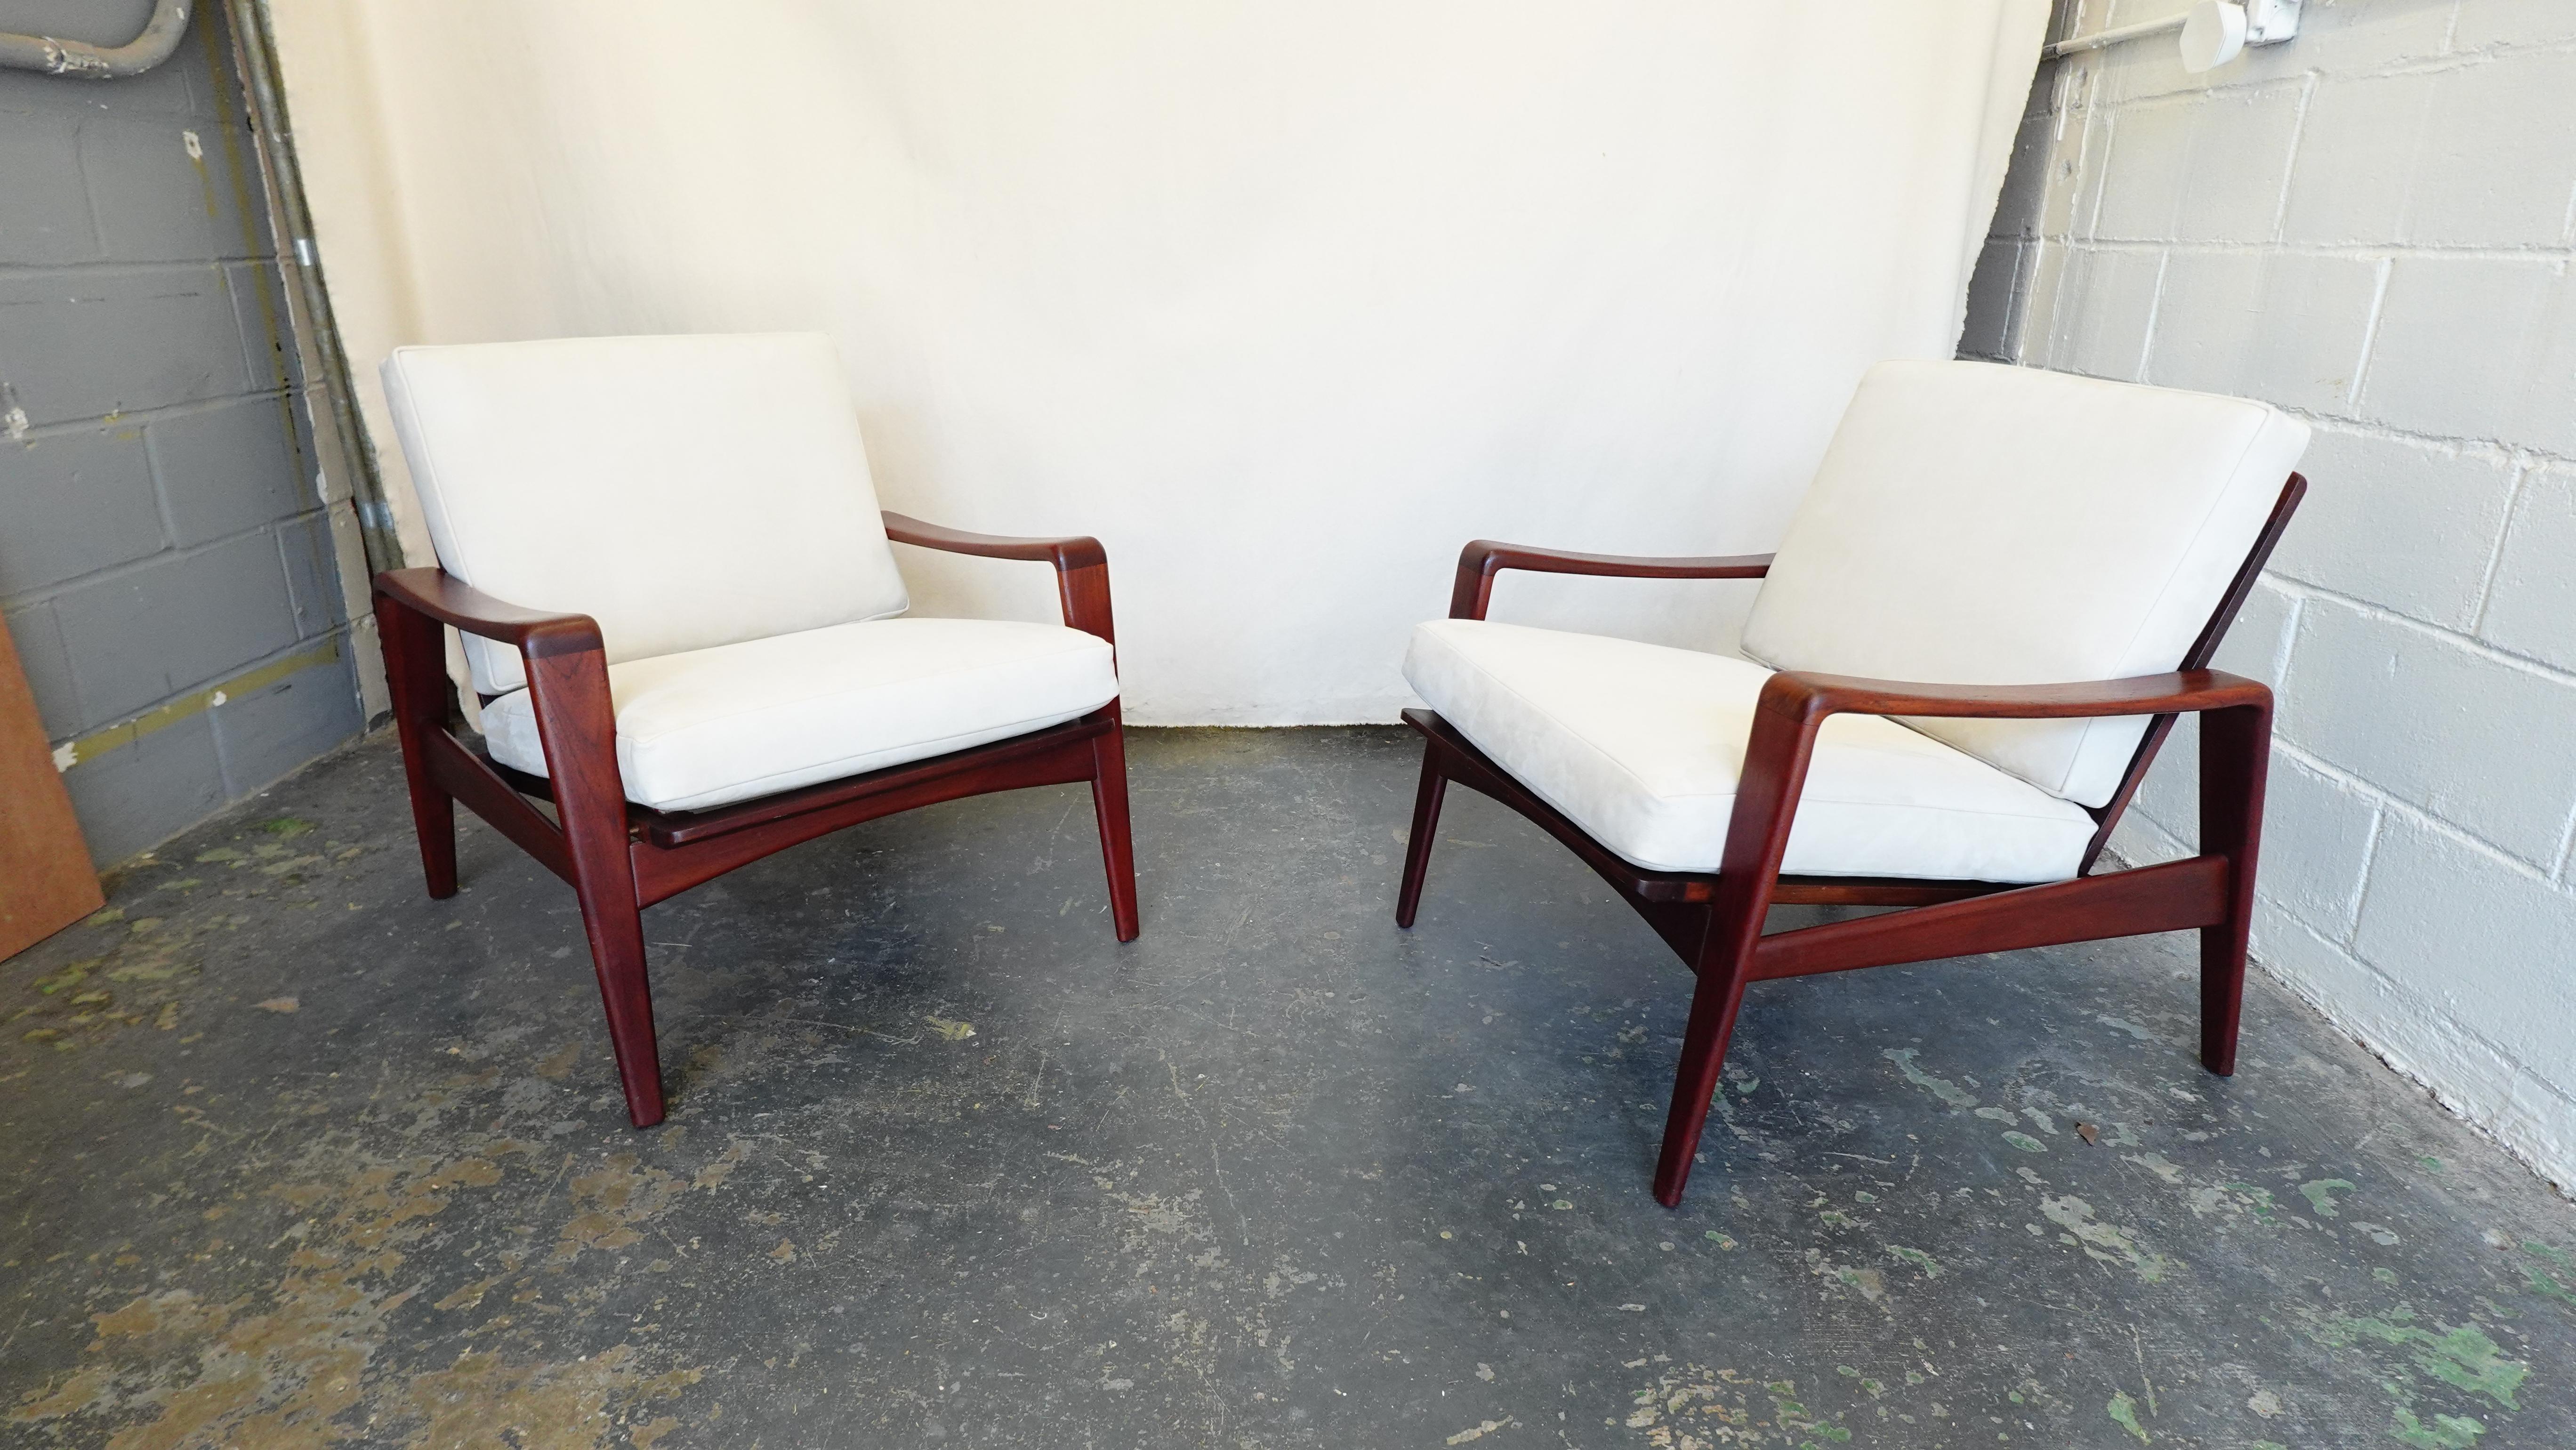 Pair of Arne Wahl Iverson Lounge Chairs for Komfort in Teak & Leather, 1960 For Sale 6